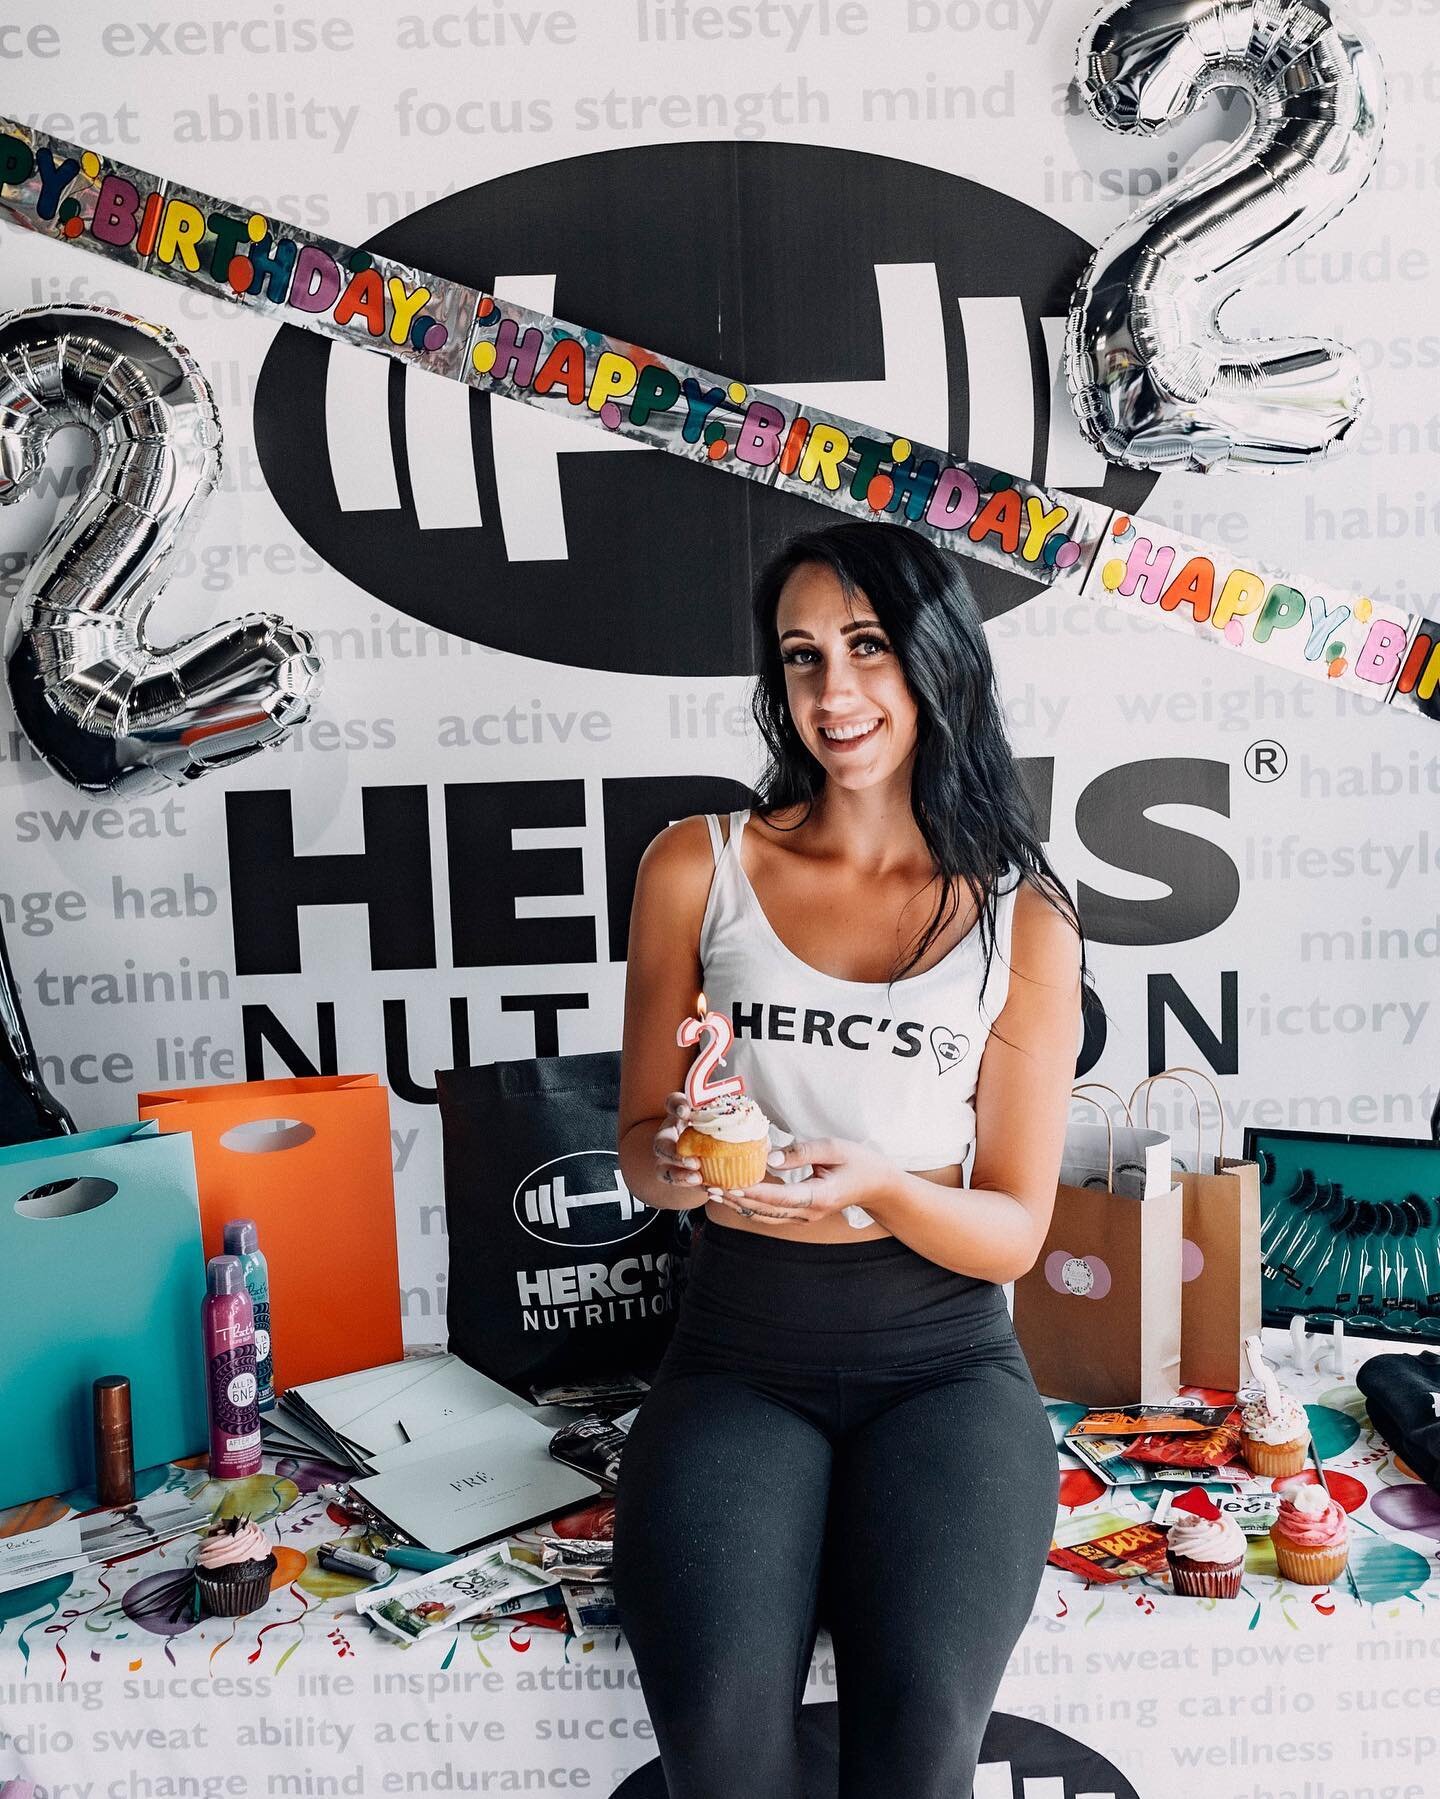 INTRODUCING MARISSA TRUDEAU: ✨

“Hi I’m Marissa! I am the owner/operator of Herc’s here in Calgary and we are so proud to have just celebrated our second year in business!

I strive everyday to ensure that EVERYONE feels comfortable walking into my s